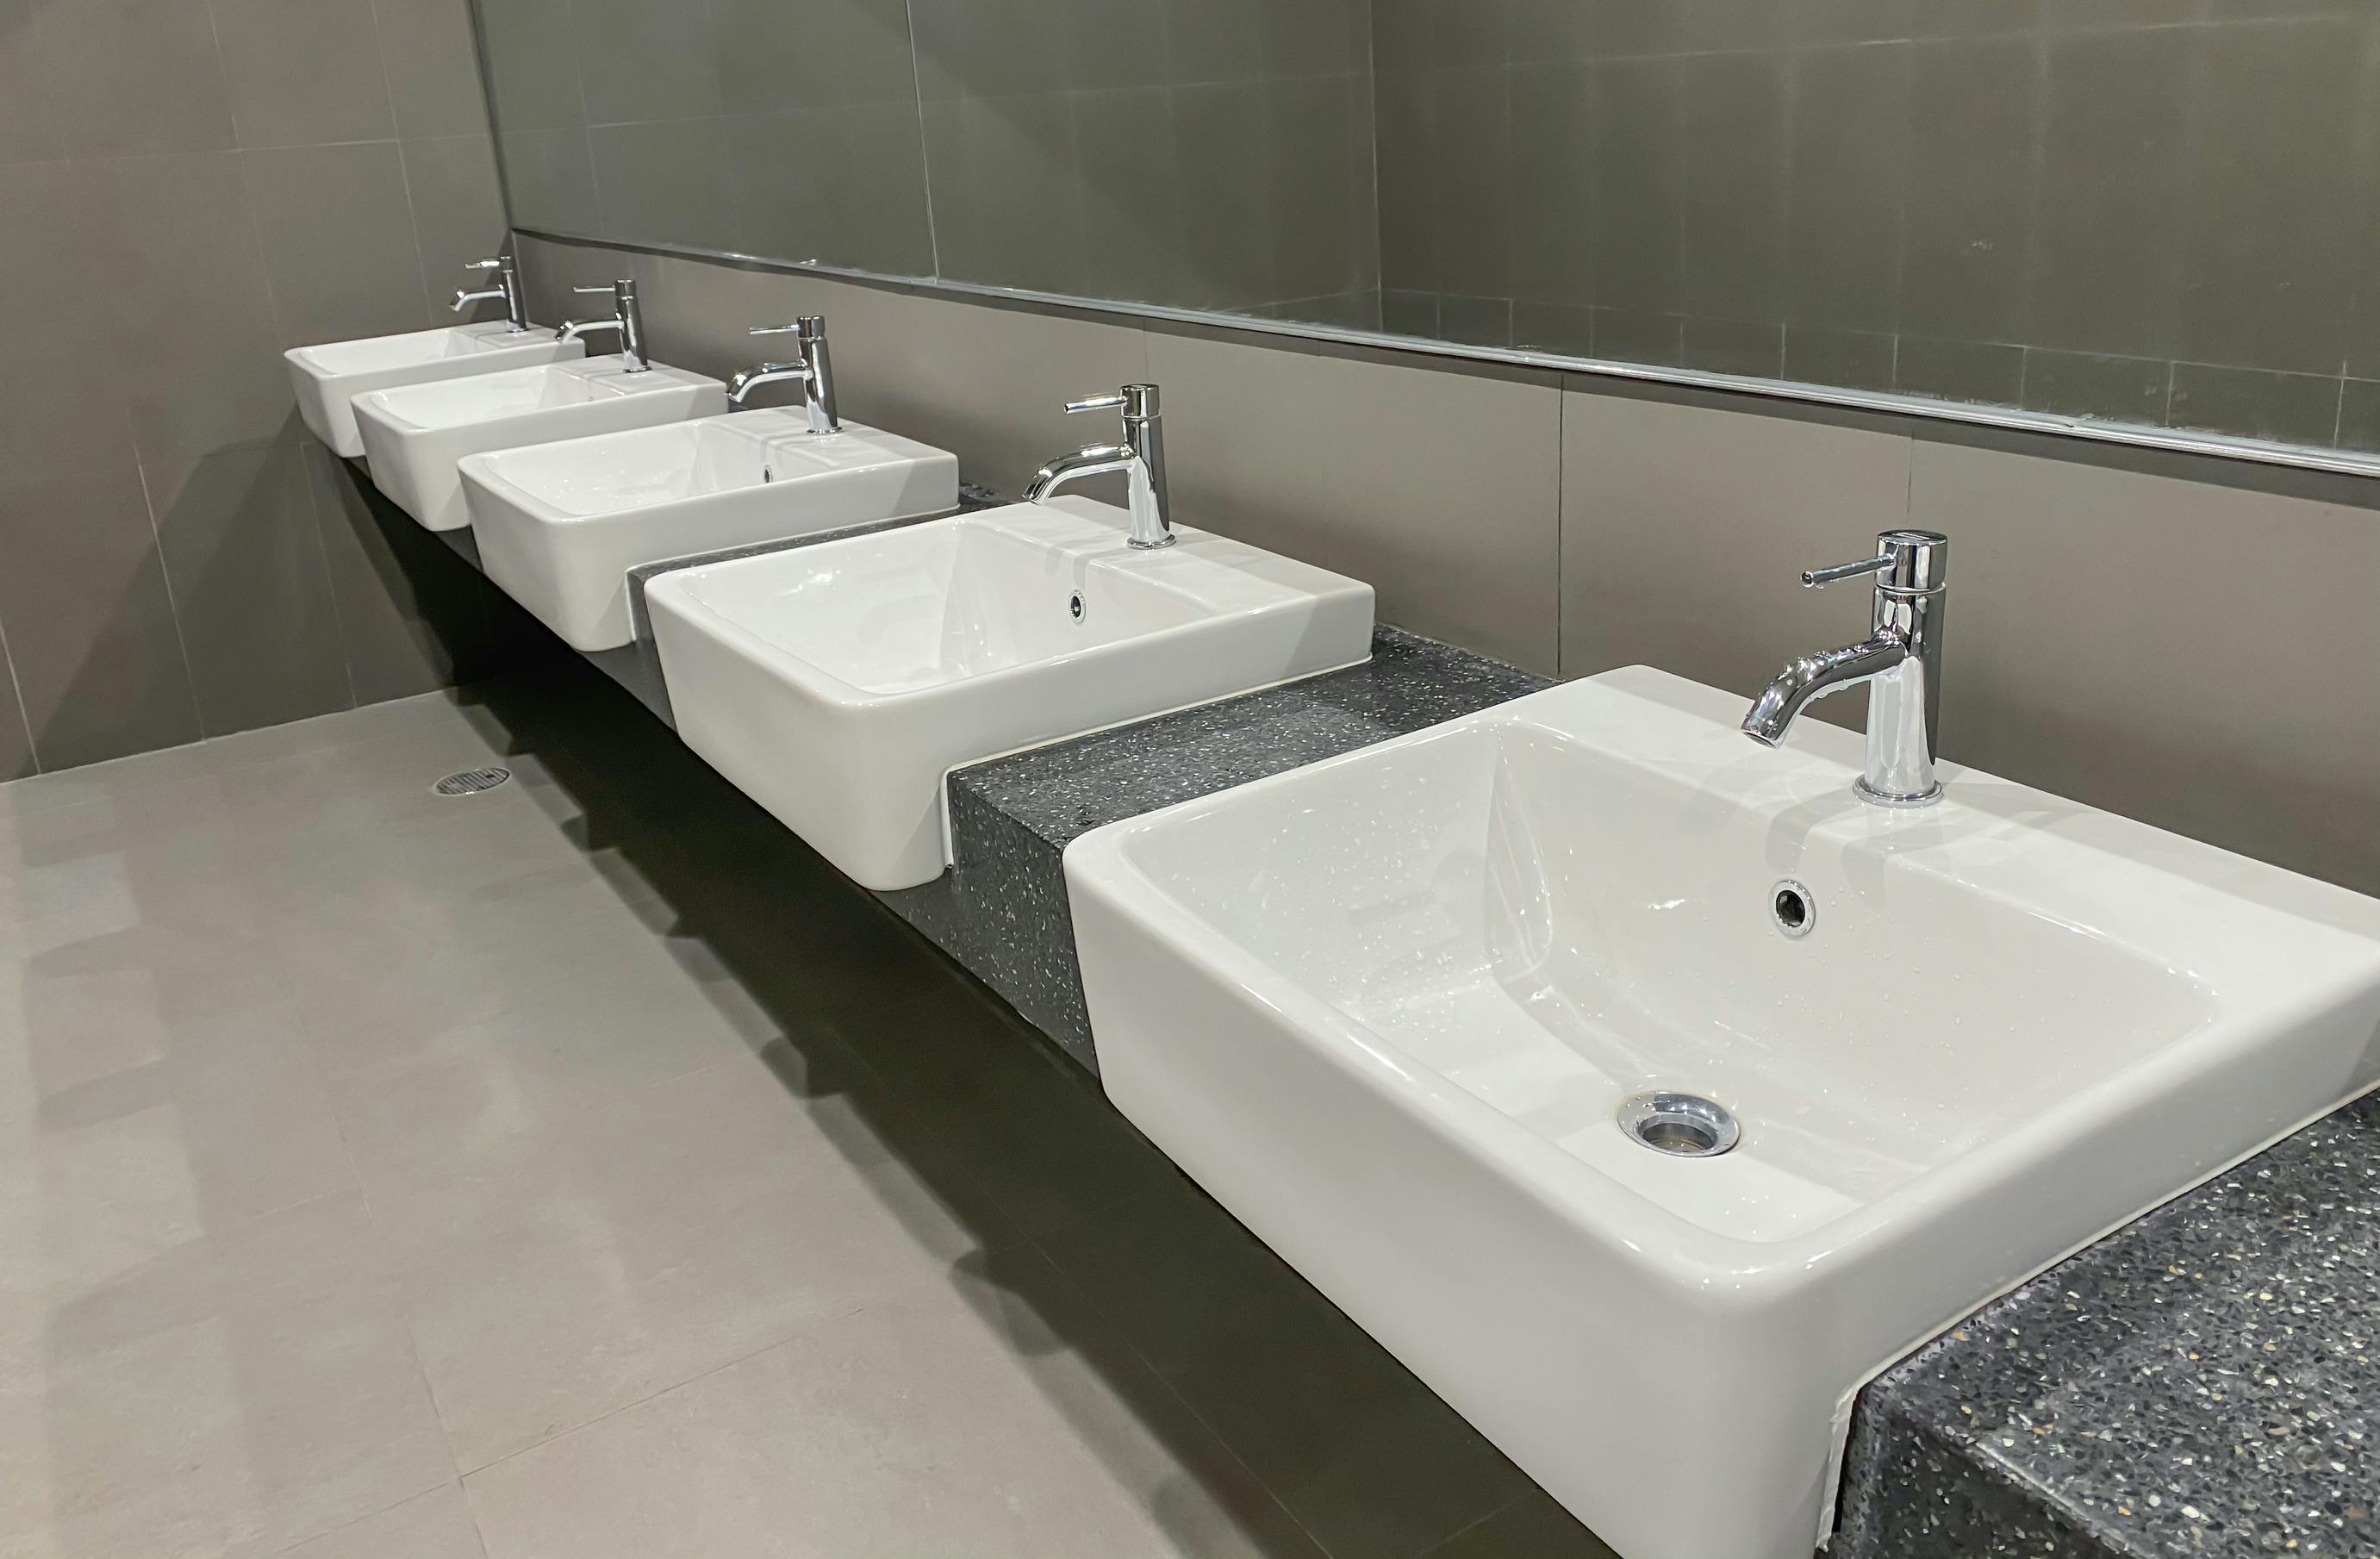 A line of white counter sinks in a public restroom